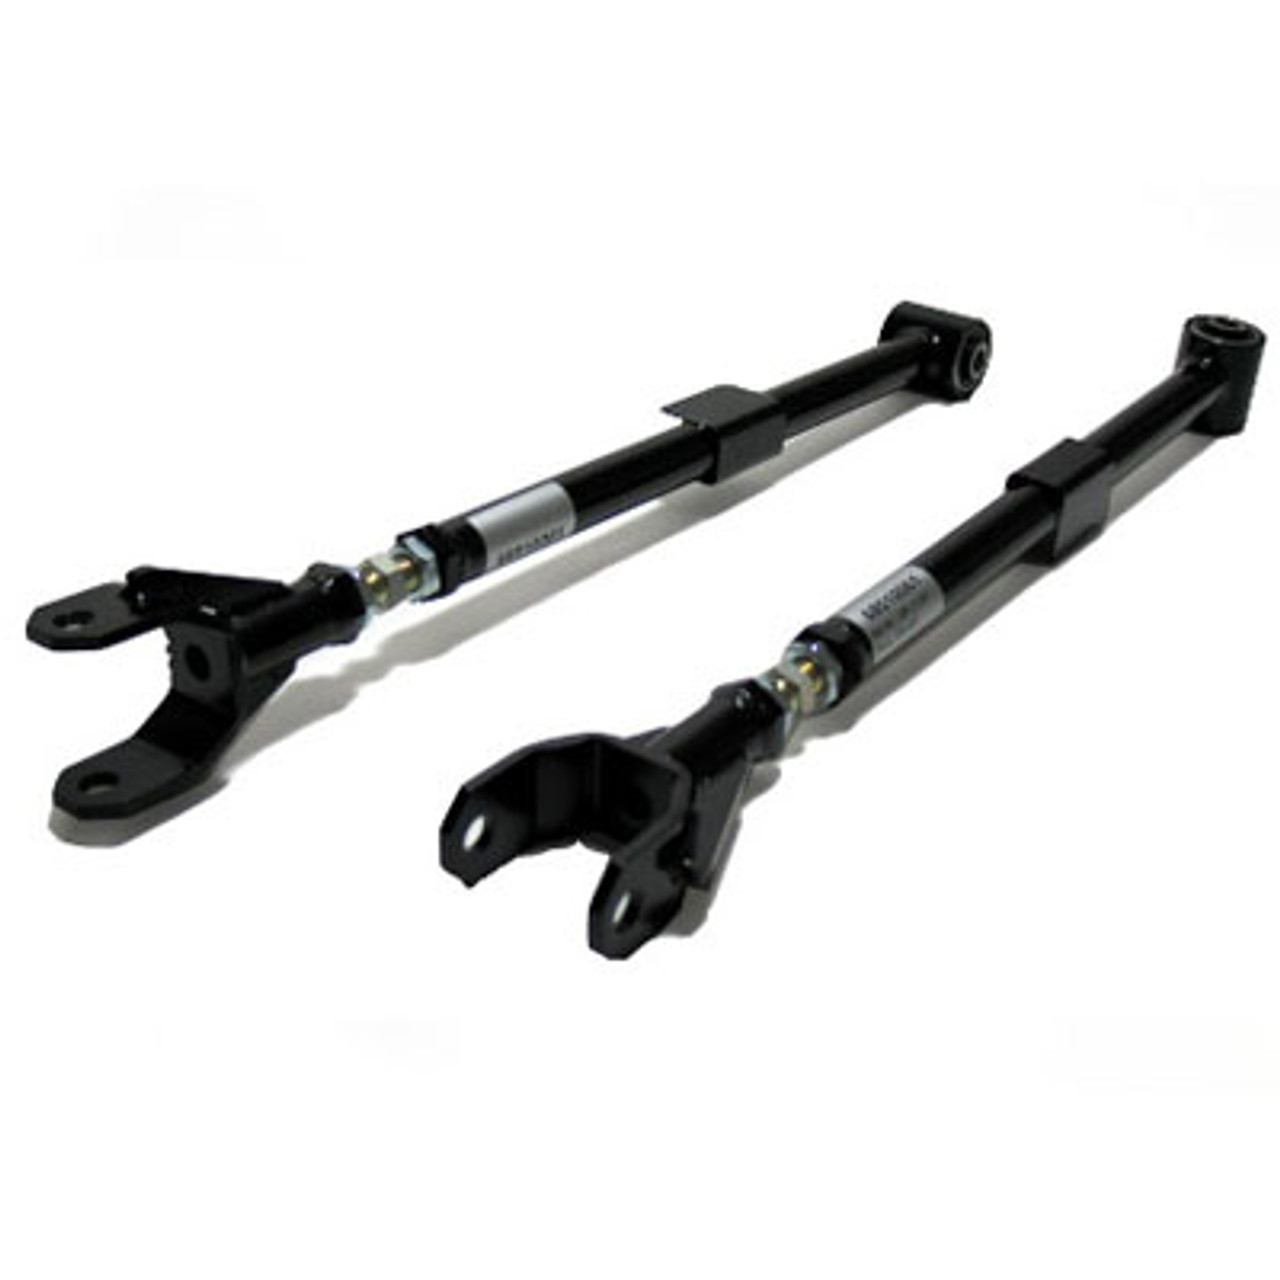 KW Adjustable Rear Tie Arms - Audi S3 (8L) - Awesome GTI - Volkswagen Audi  Group Specialists